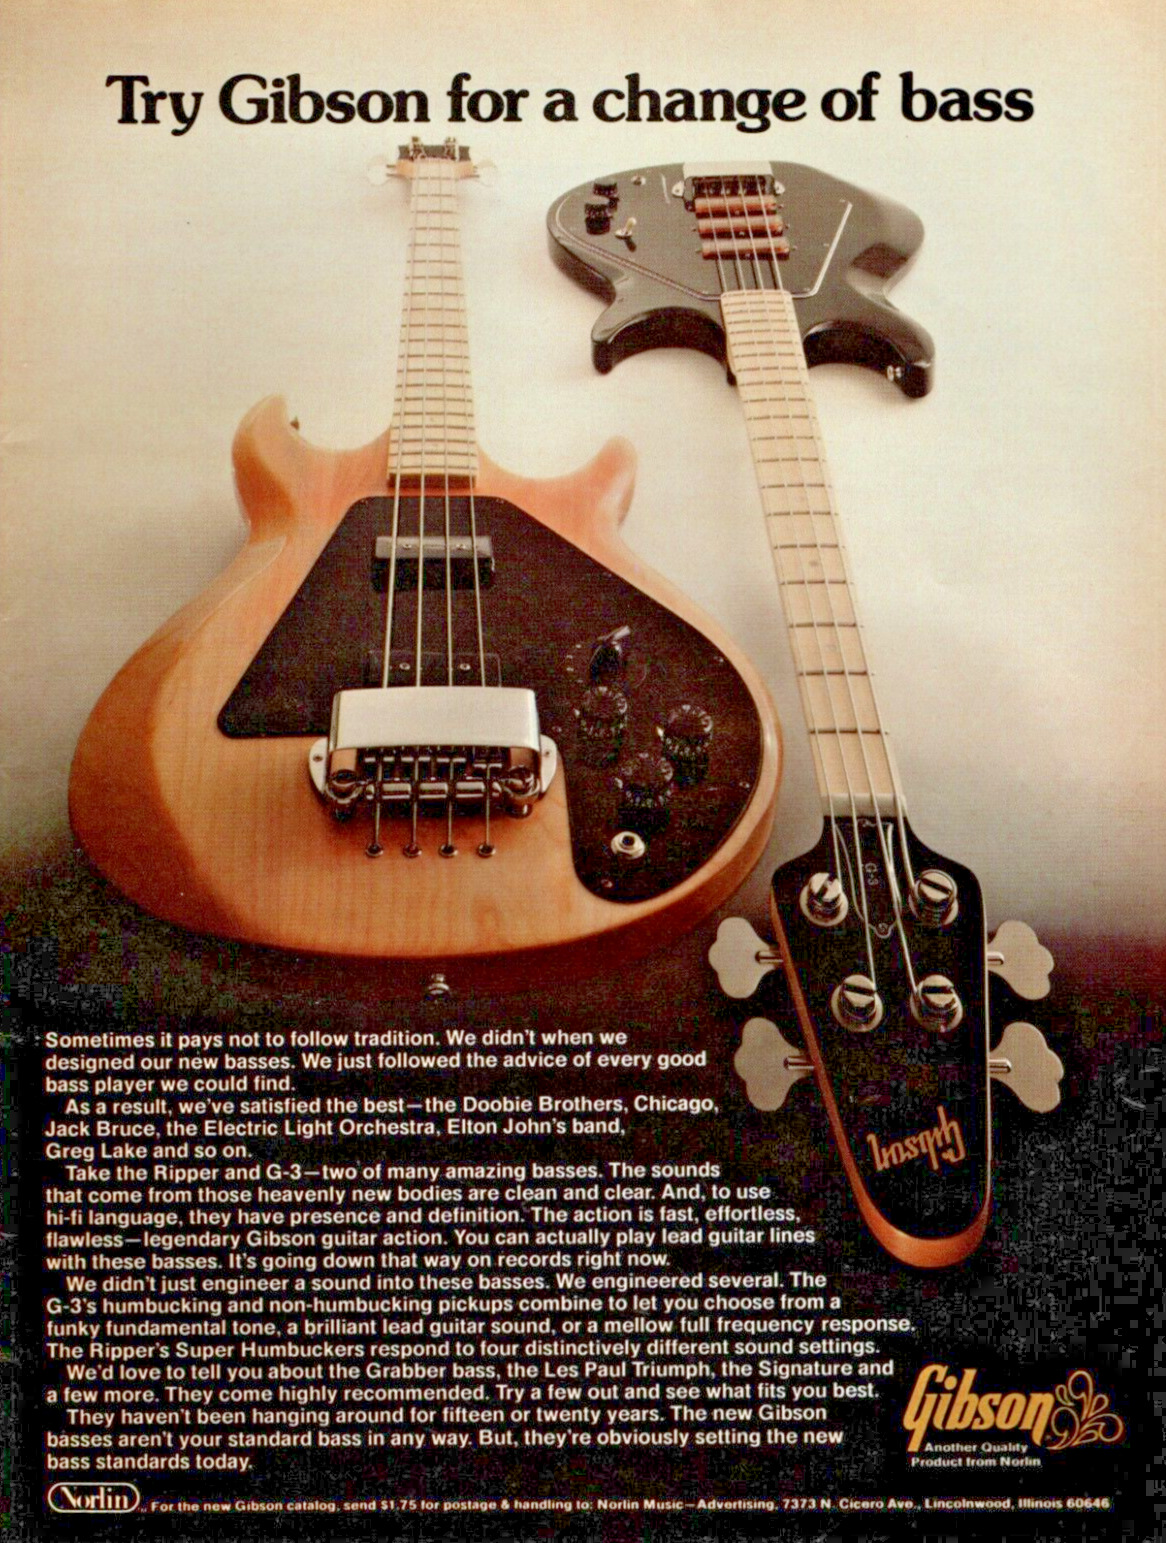 vtg 1970s GIBSON RIPPER & G-3 MAGAZINE PRINT AD Bass Guitars Pinup Page